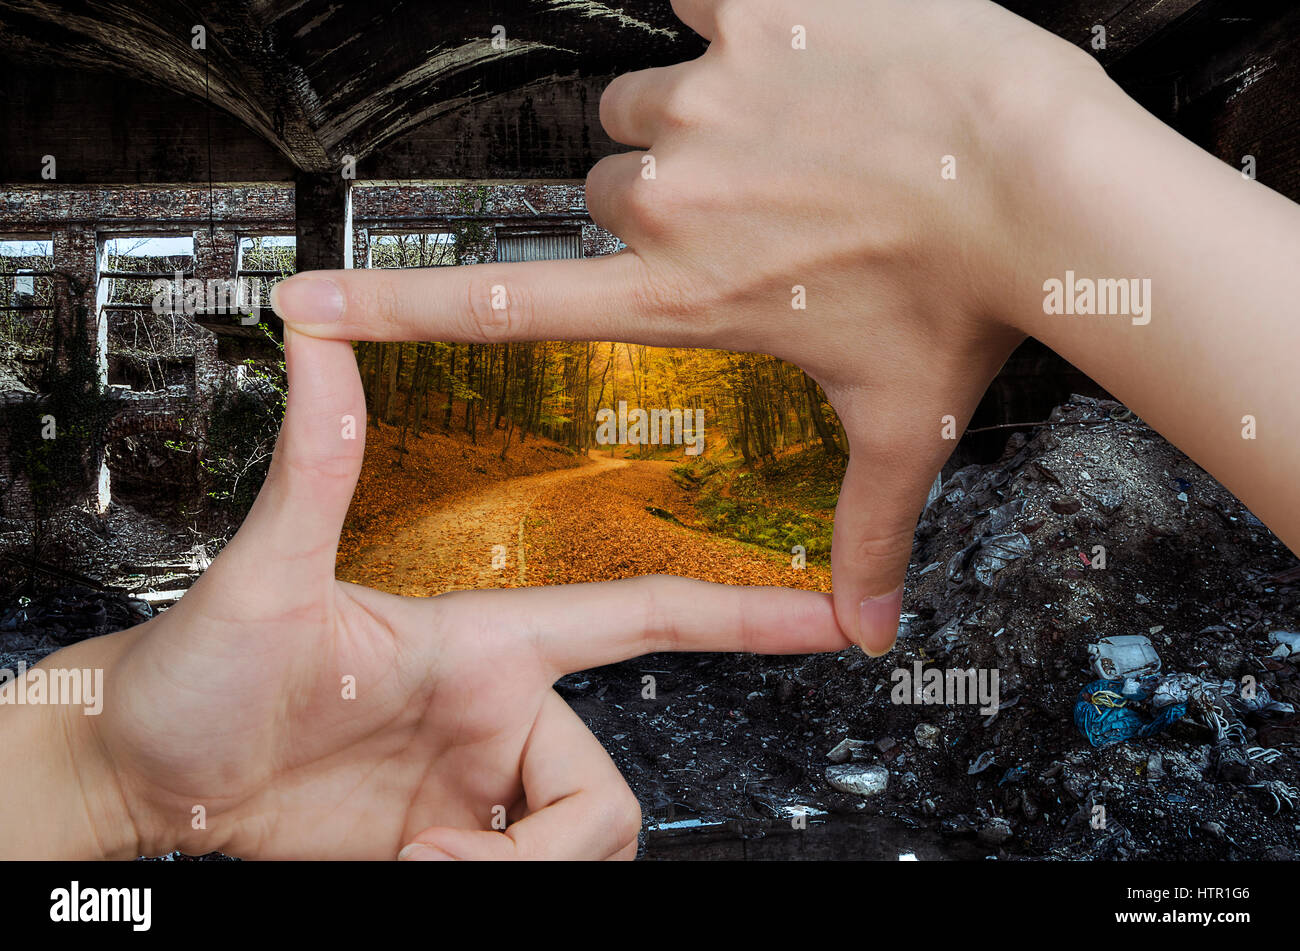 fingers creating a square making the vision of garbage and ruins turn to clean nature Stock Photo